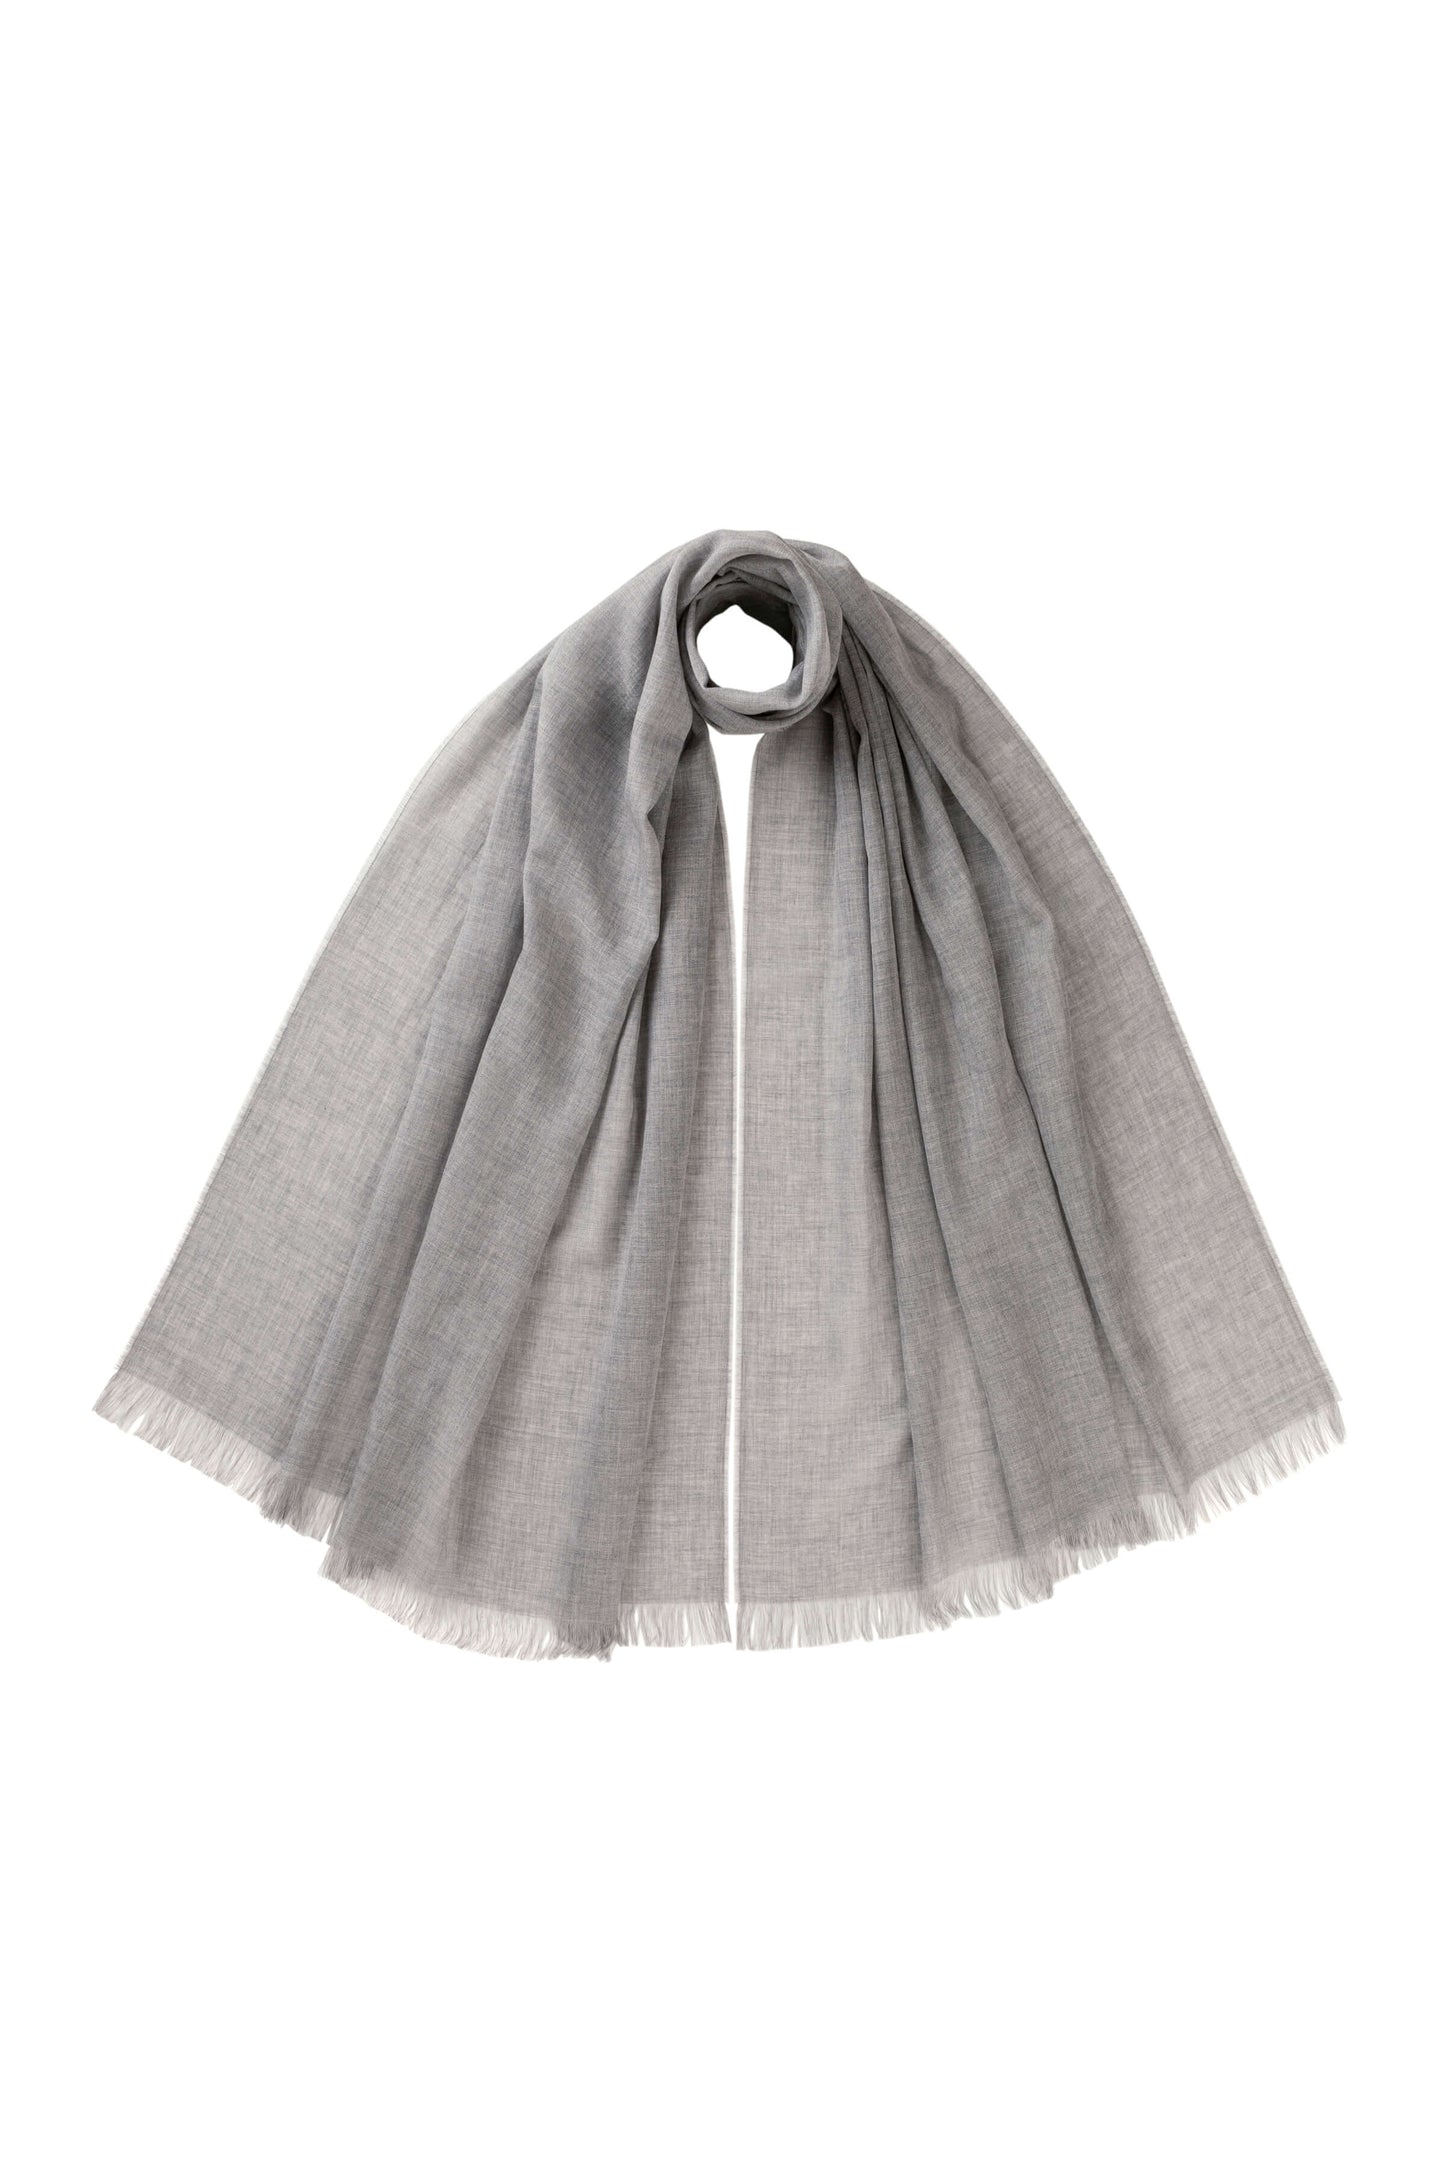 Johnstons of Elgin Lightweight Merino Wool Scarf in Silver grey shown on white background WD001093HA2051ONE